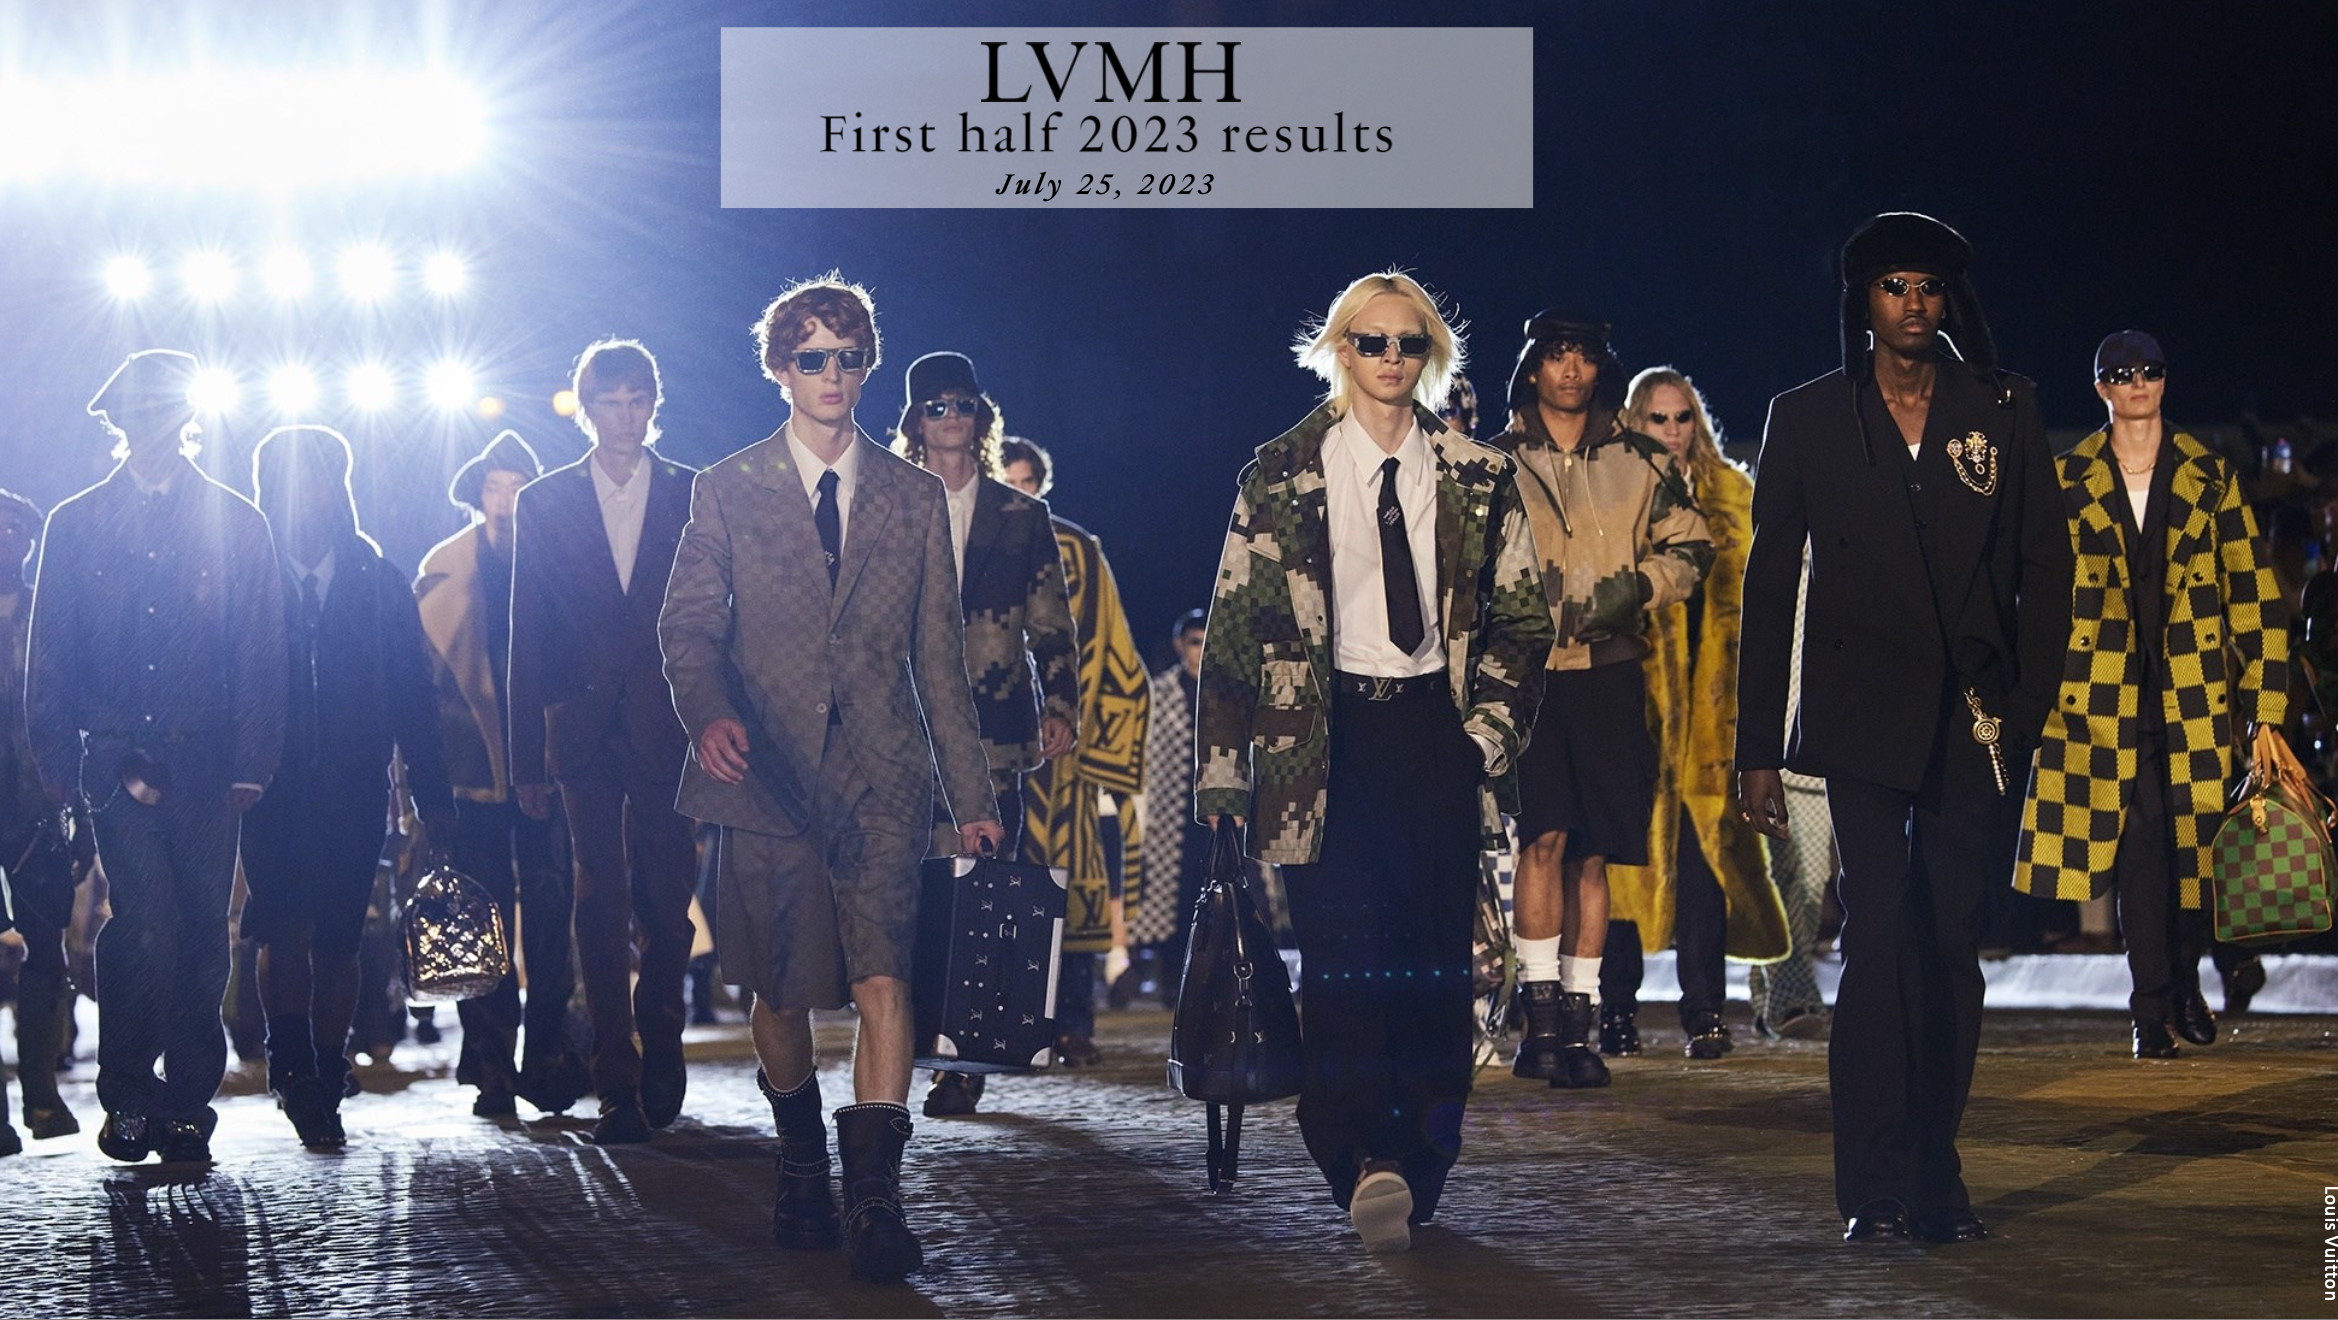 LVMH Group: Chinese Consumers Contribute 40-45% Increase in Global Sales Compared to Two Years Ago